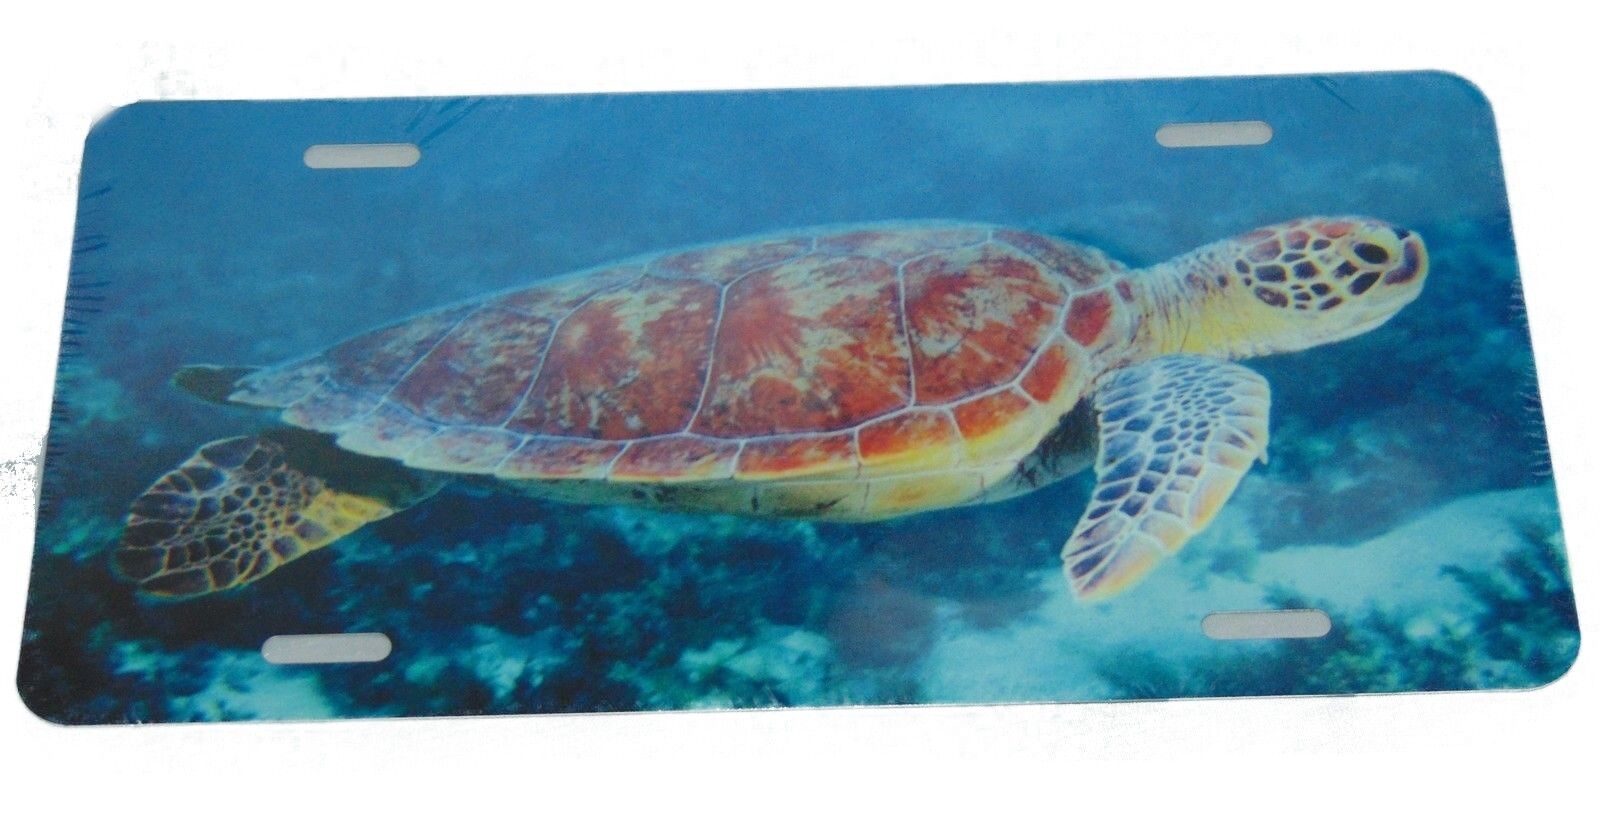 Sea Turtle License Plate 6 X 12 Inches New Aluminum Made In The Usa